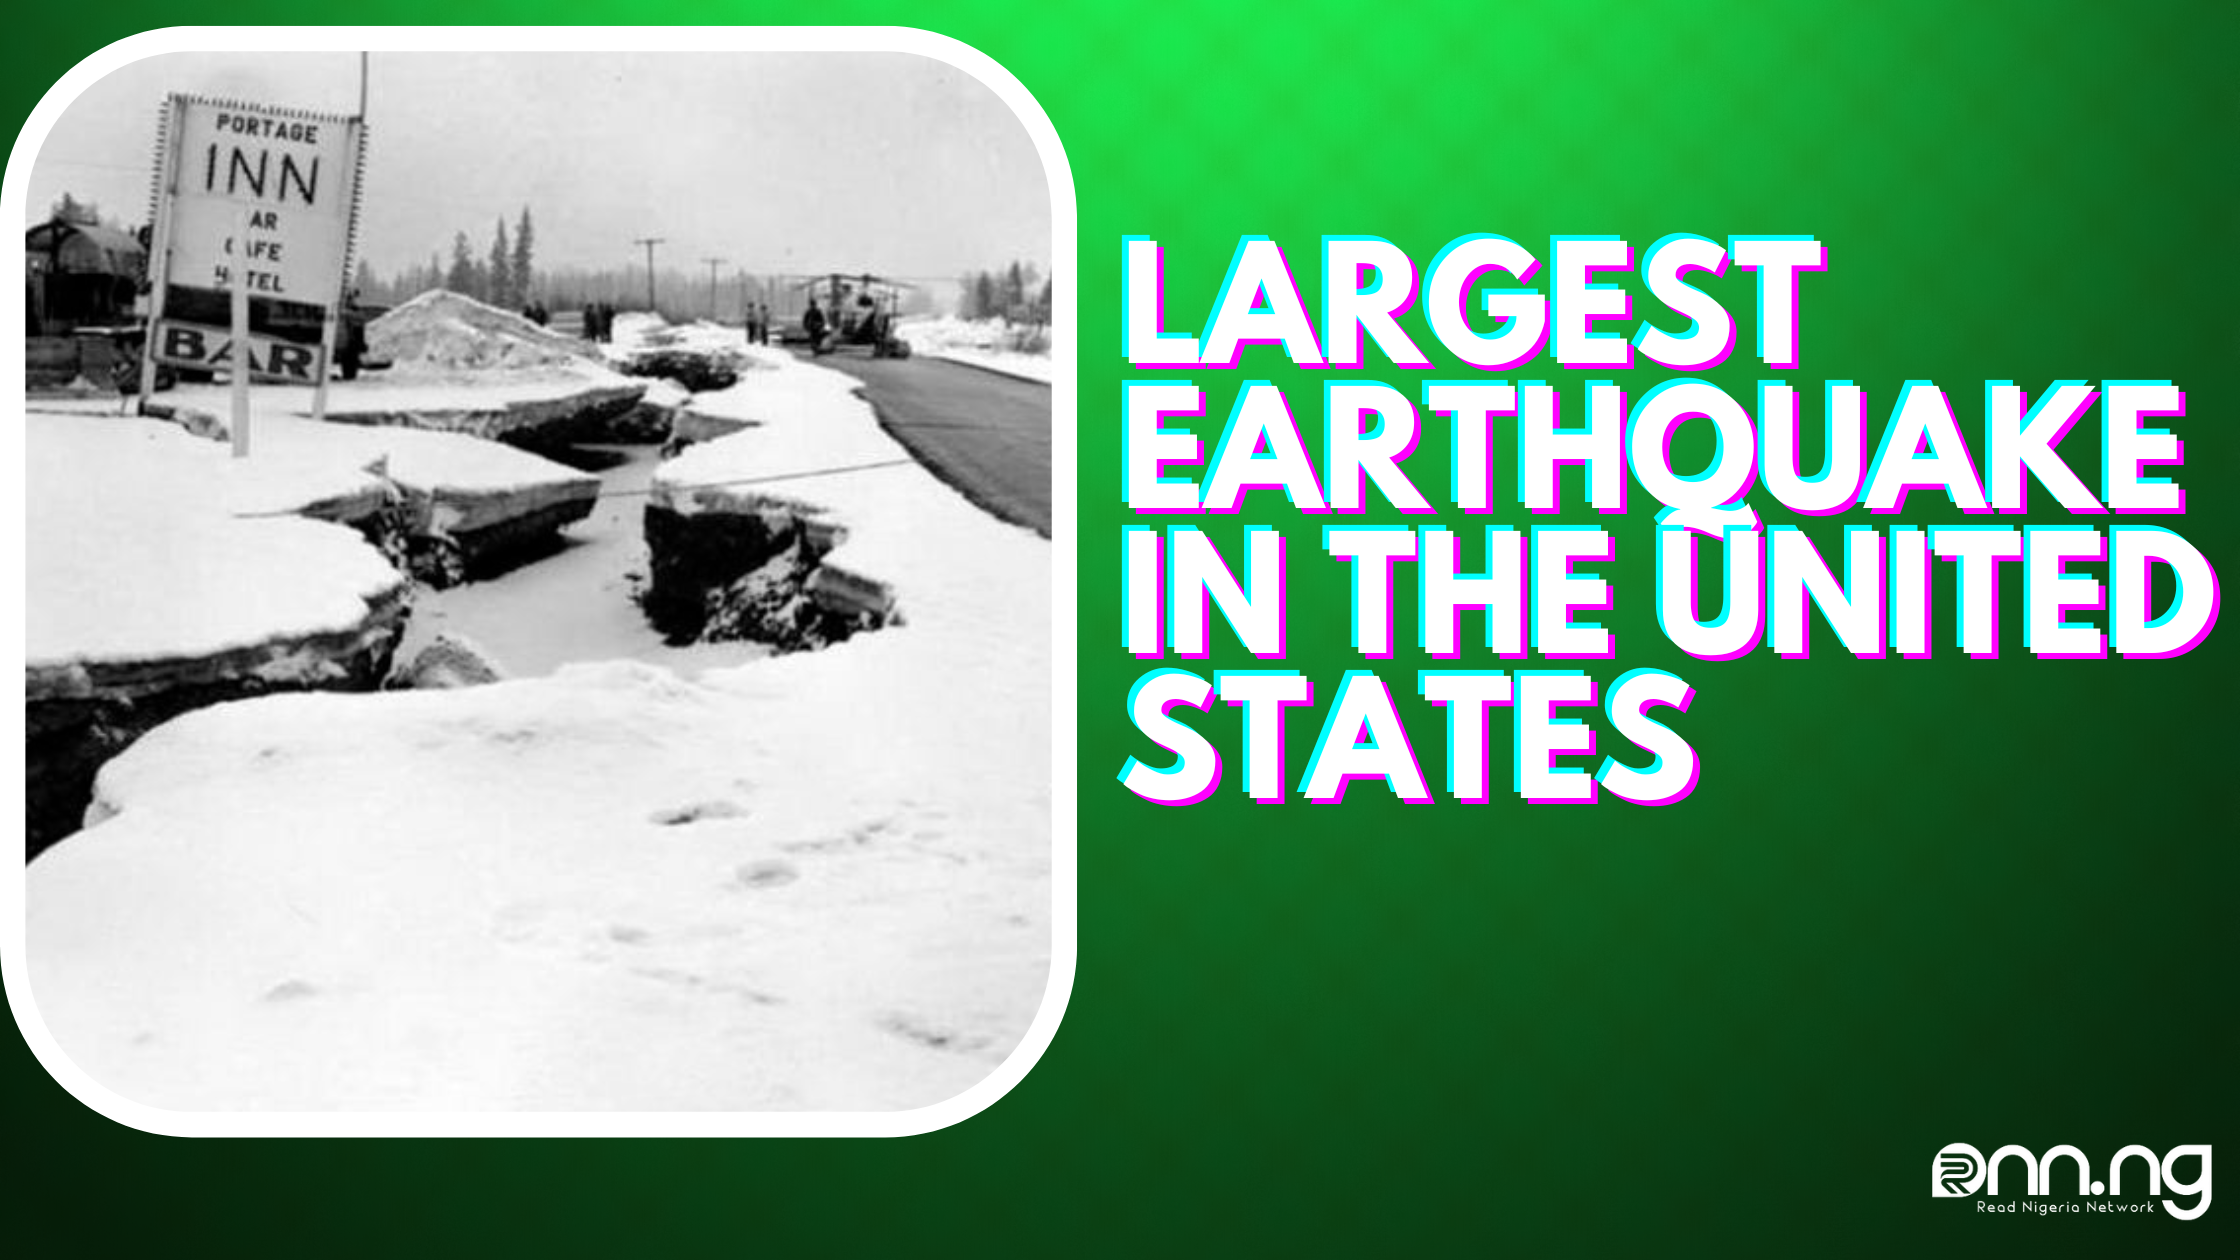 Largest Earthquakes in the United States